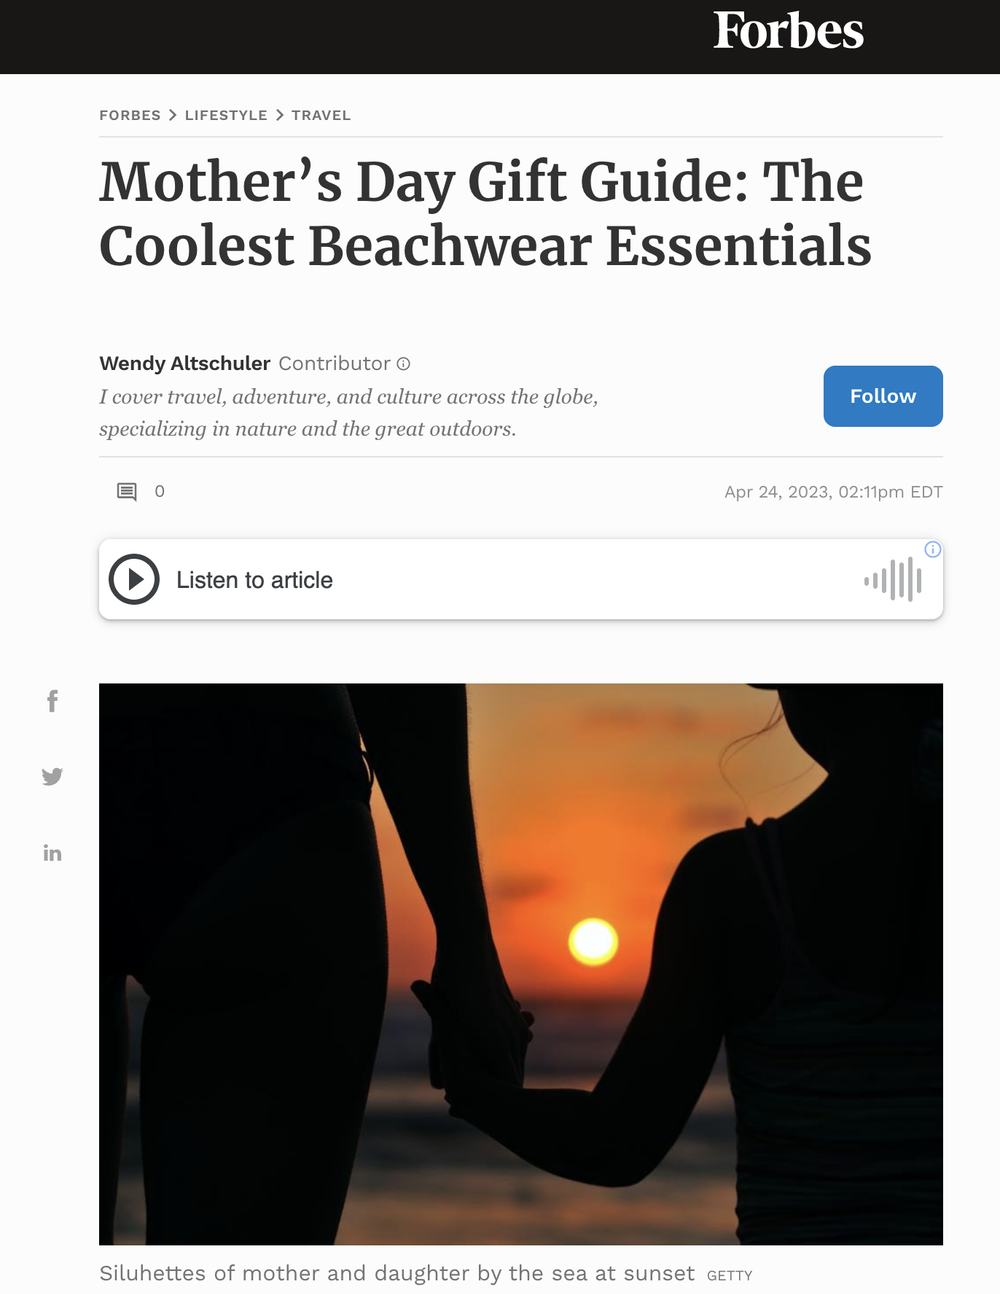 Mother’s Day Gift Guide: The Coolest Beachwear Essentials